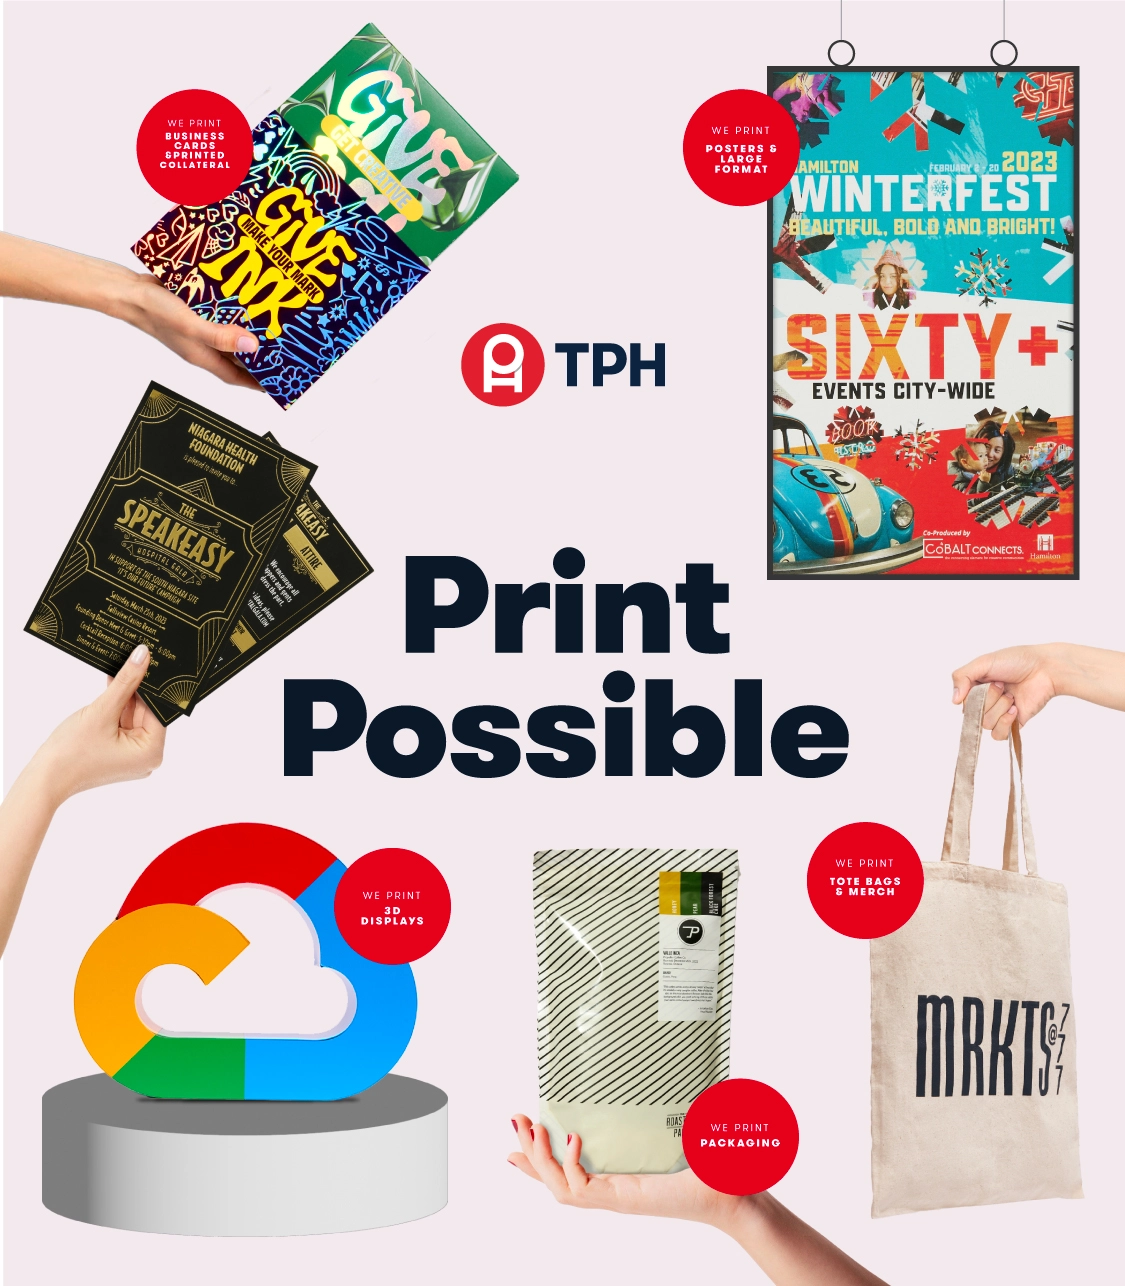 Various TPH Print Products surrounding "Print Possible"